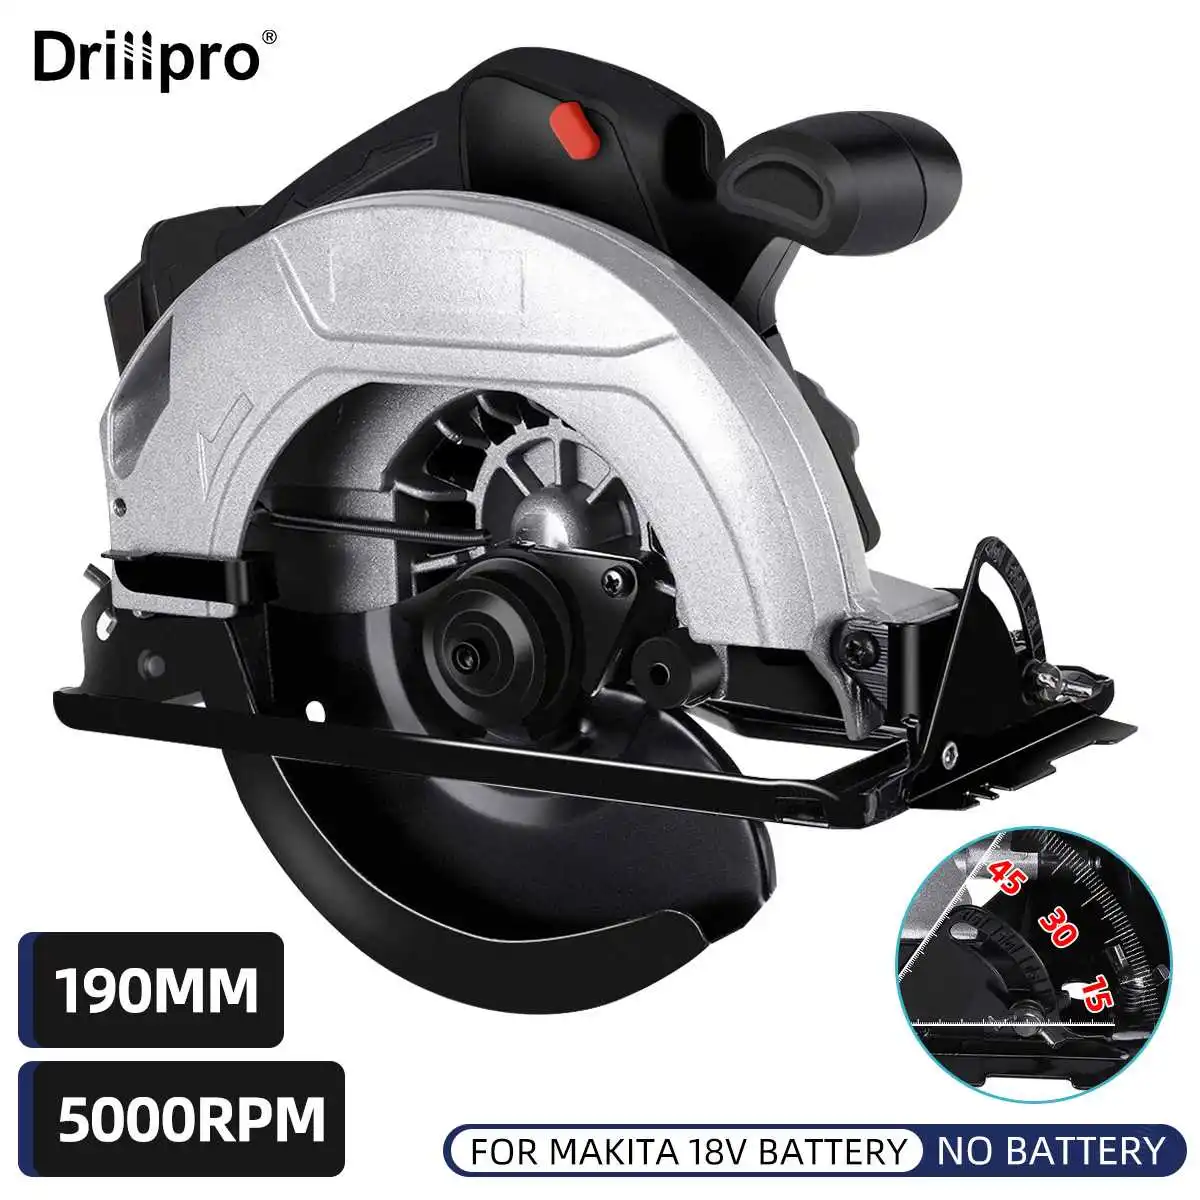 

Drillpro 190mm Electric Circular Saw Dust Passage 5000RPM Woodworking Cutting Machine Cordless Tool for Makita 18V Battery